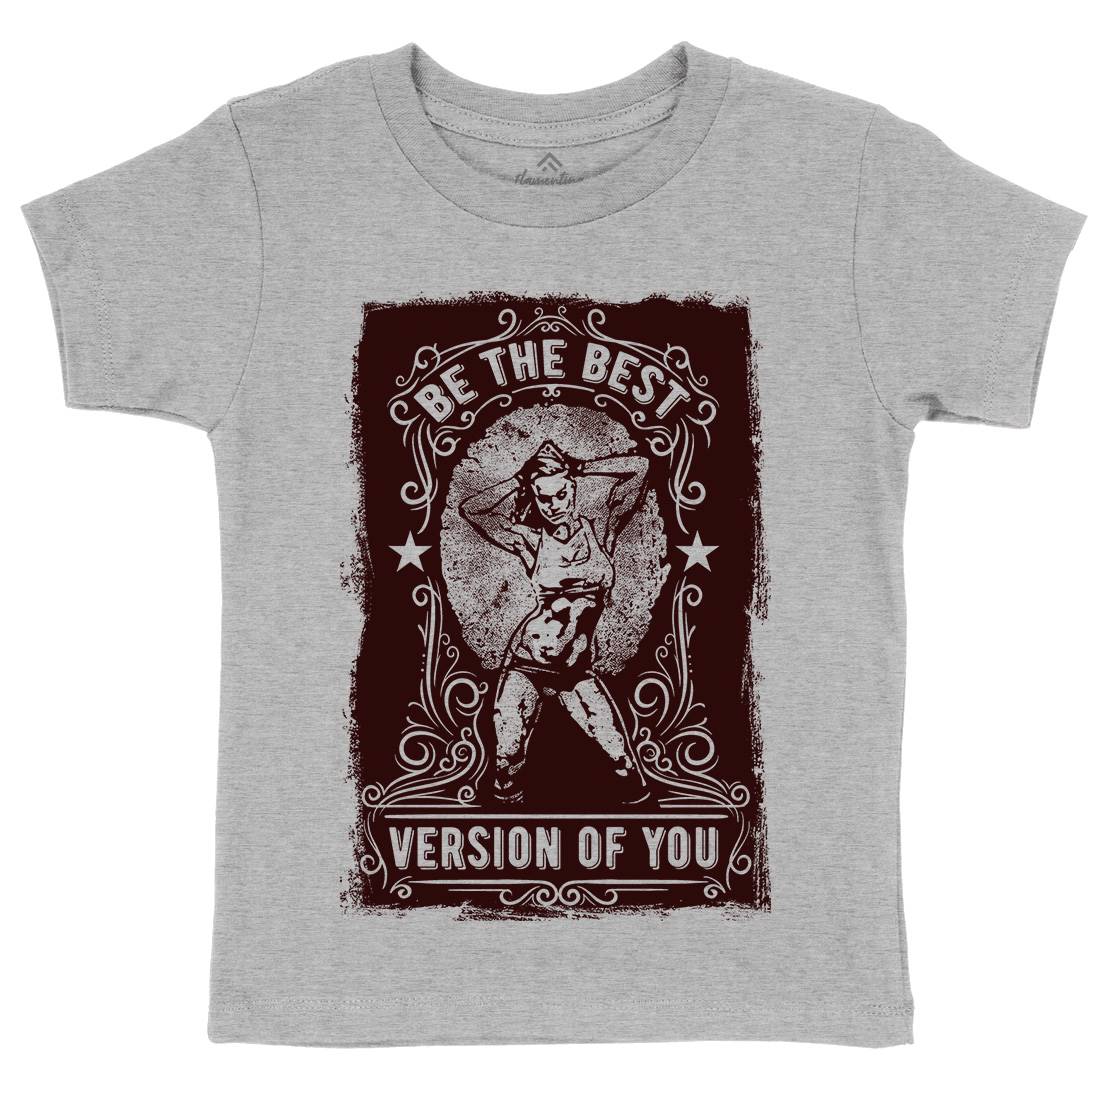 The Best Version Of You Kids Organic Crew Neck T-Shirt Gym C984